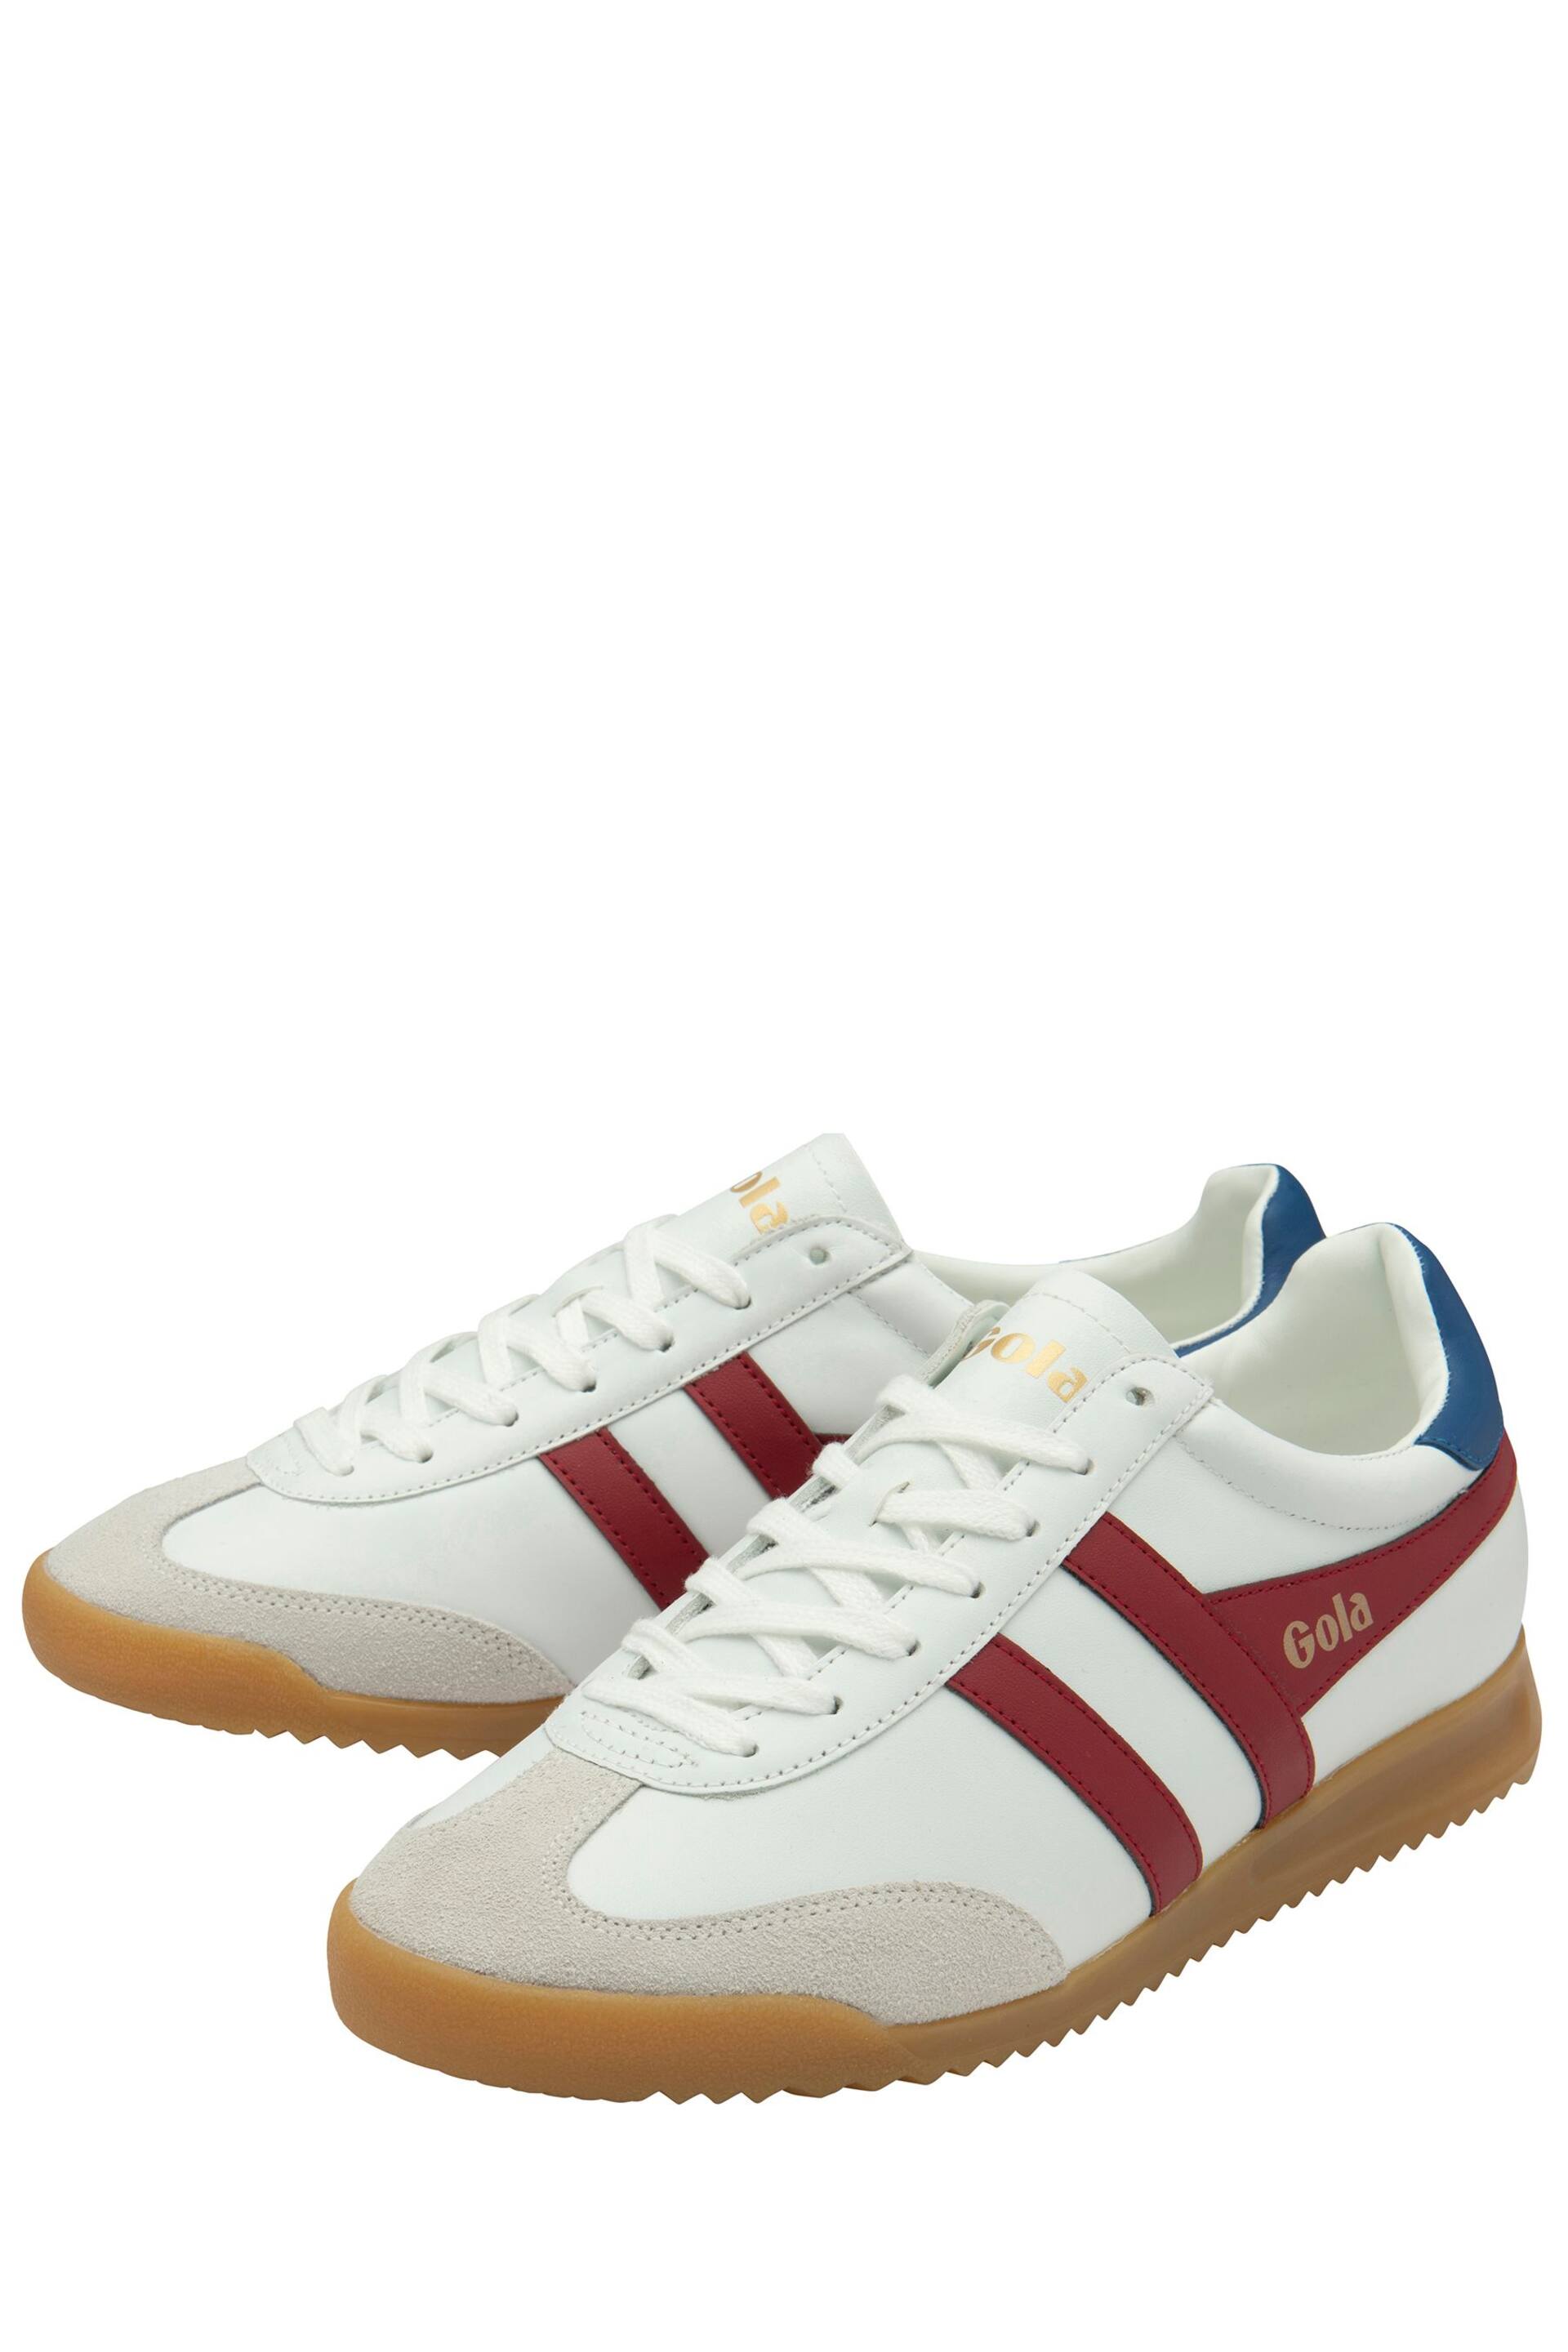 Gola White/Deep Red/Sapphire Mens Torpedo Leather Lace-Up Trainers - Image 2 of 4